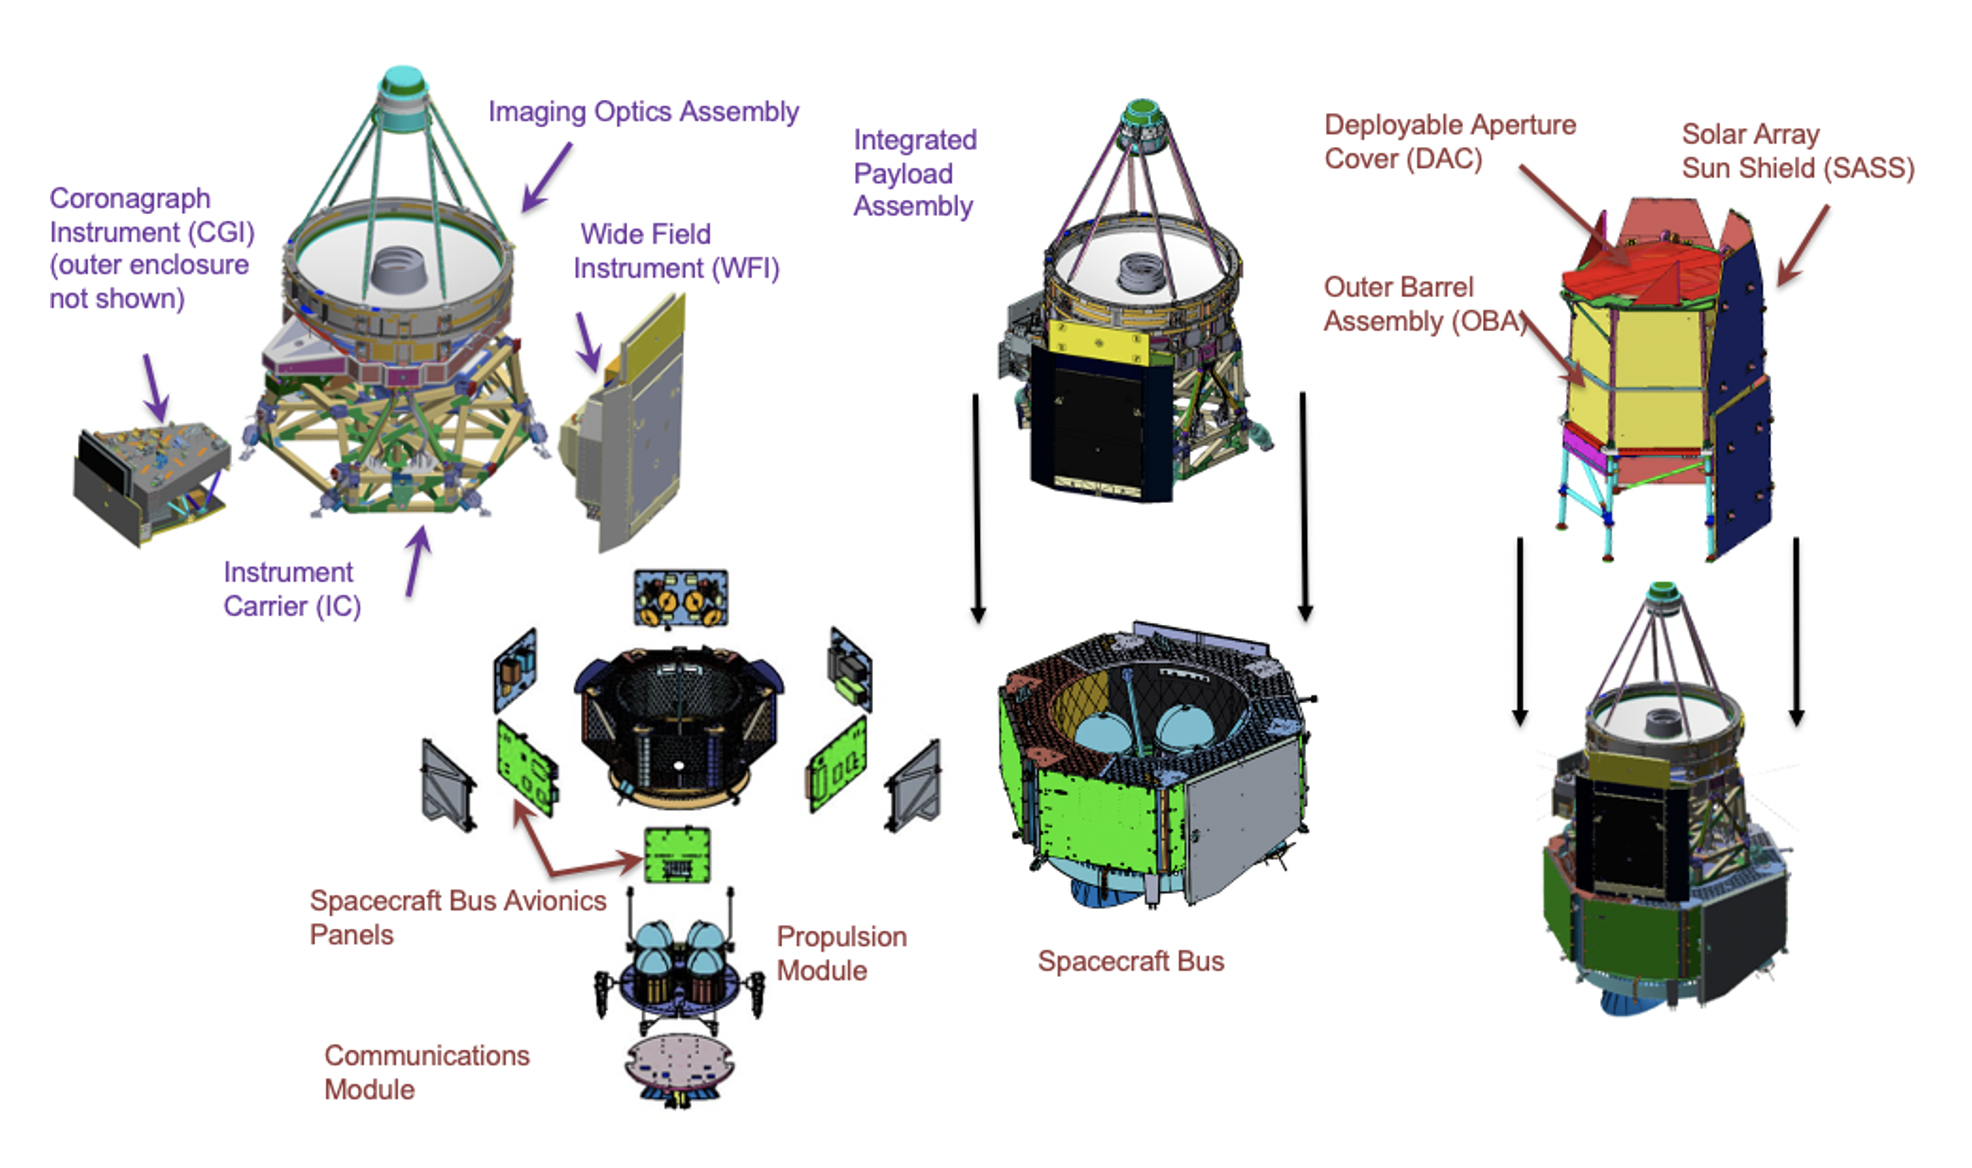 The Roman observatory split into its spacecraft (red) and integrated payload (purple) components